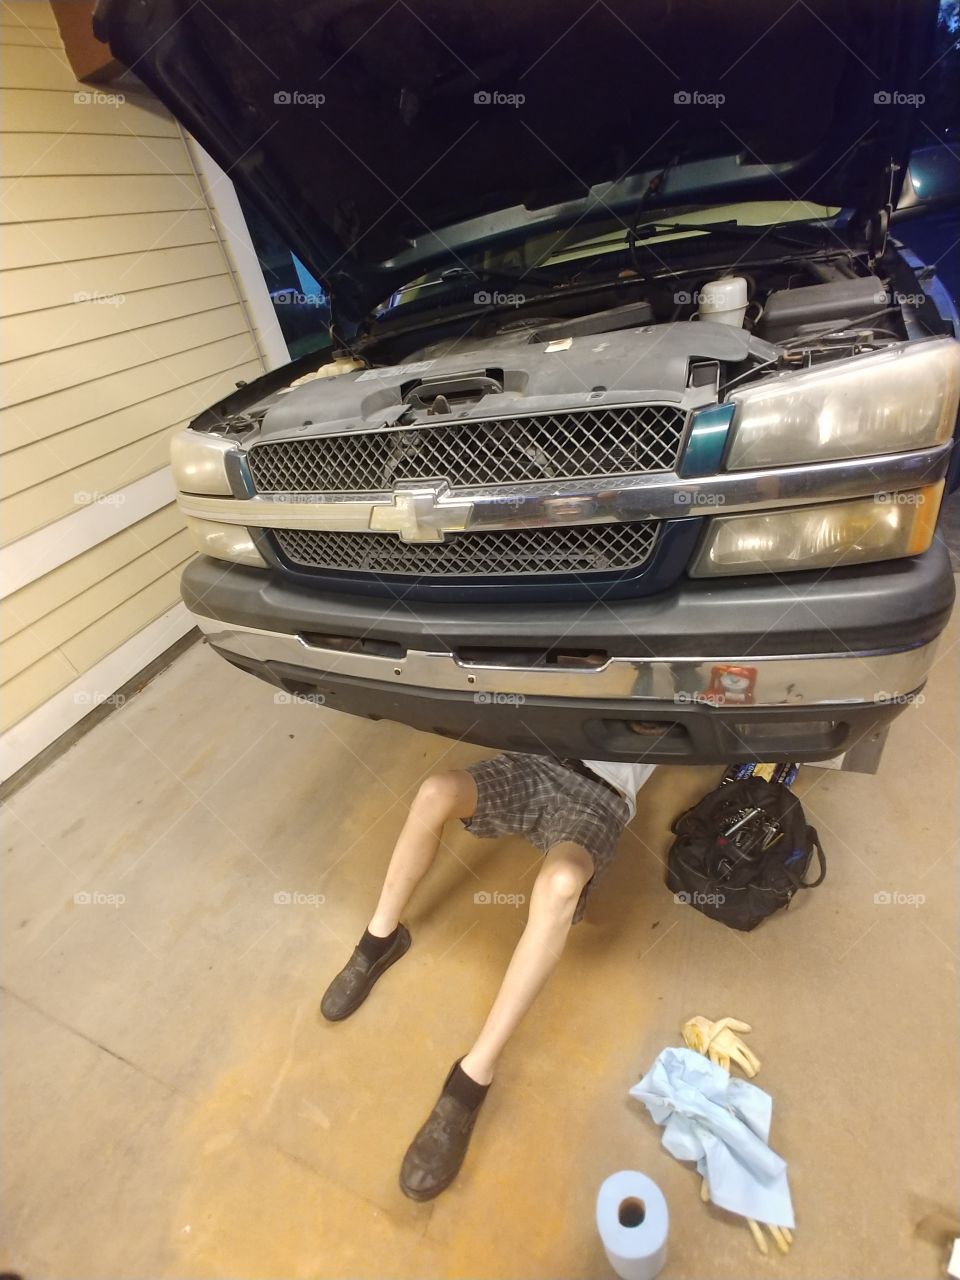 My friend had offered to change my oil after a long day of stressful events, so I let him!